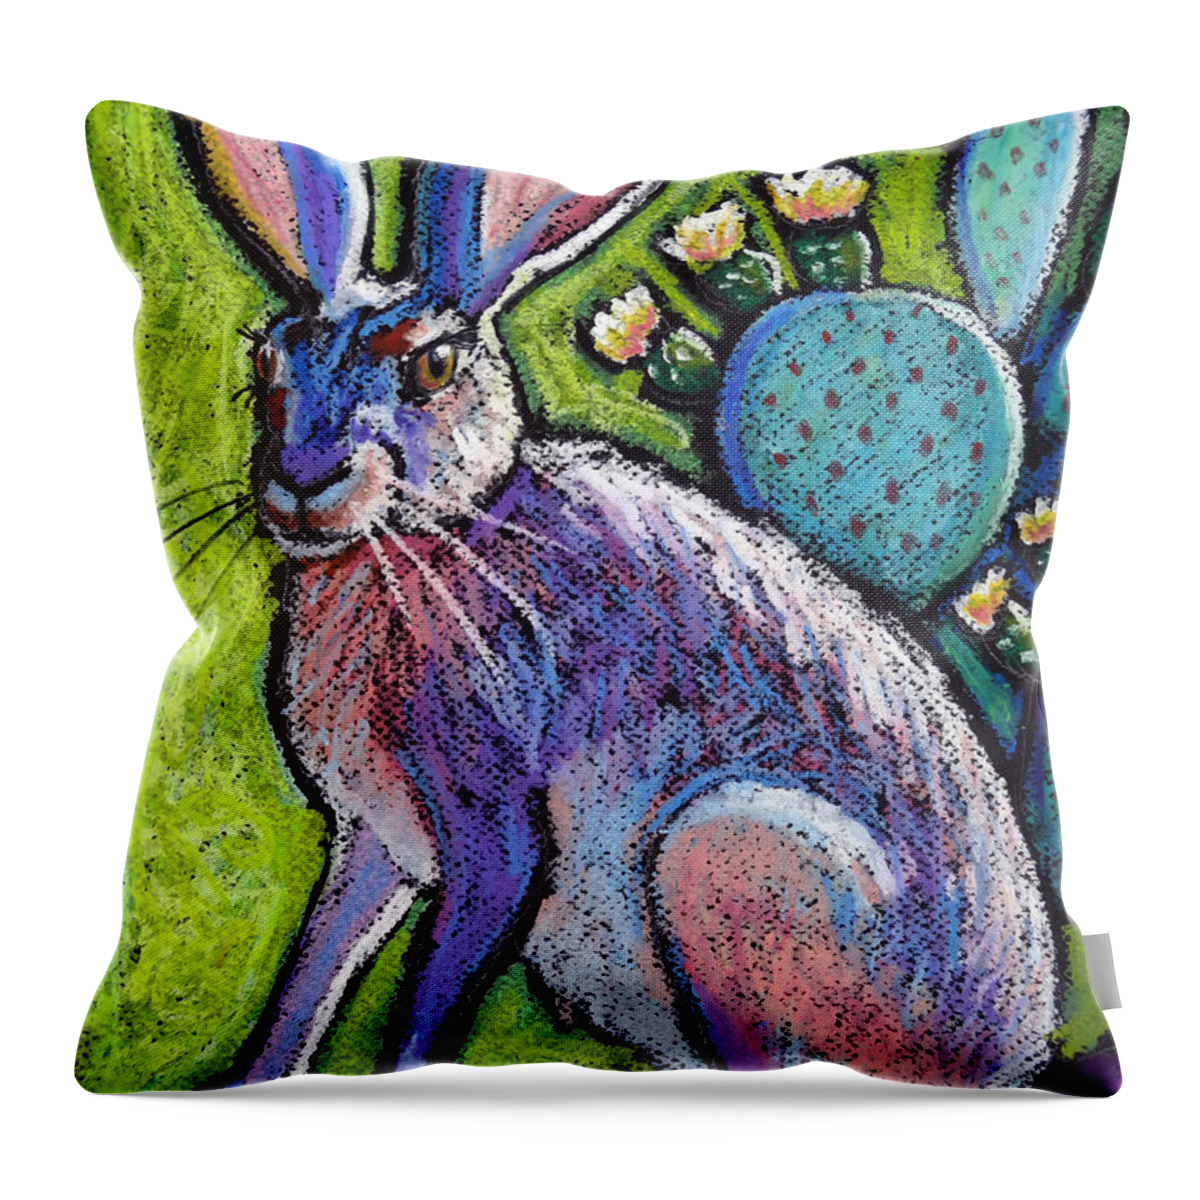 Jackrabbit Throw Pillow featuring the painting Blooming Jackrabbit by Ande Hall